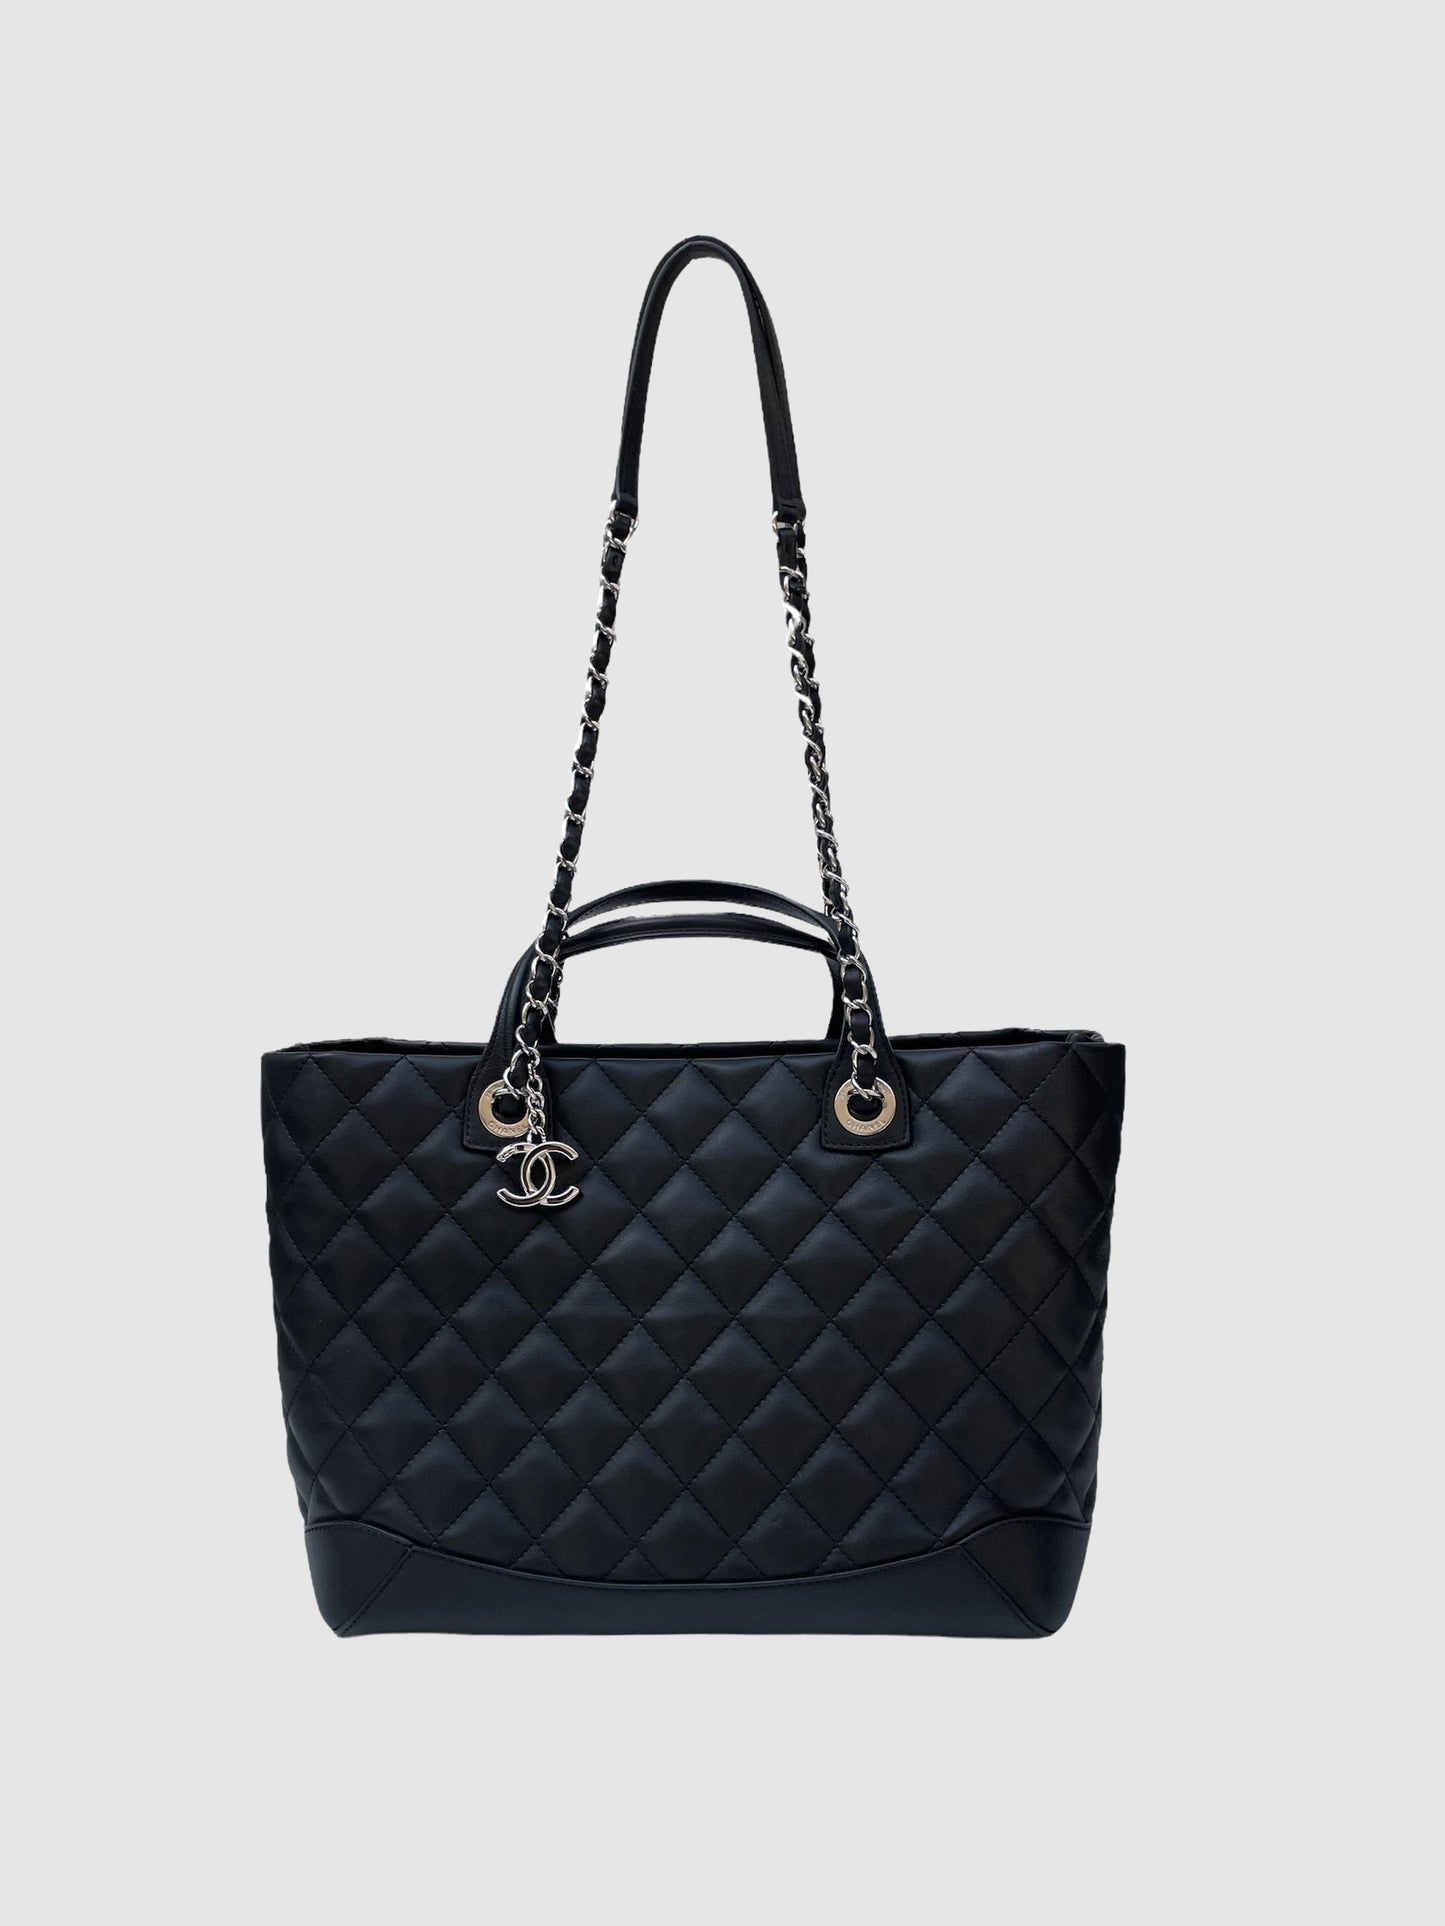 Chanel "Easy Shopping Tote" - Second Nature Boutique